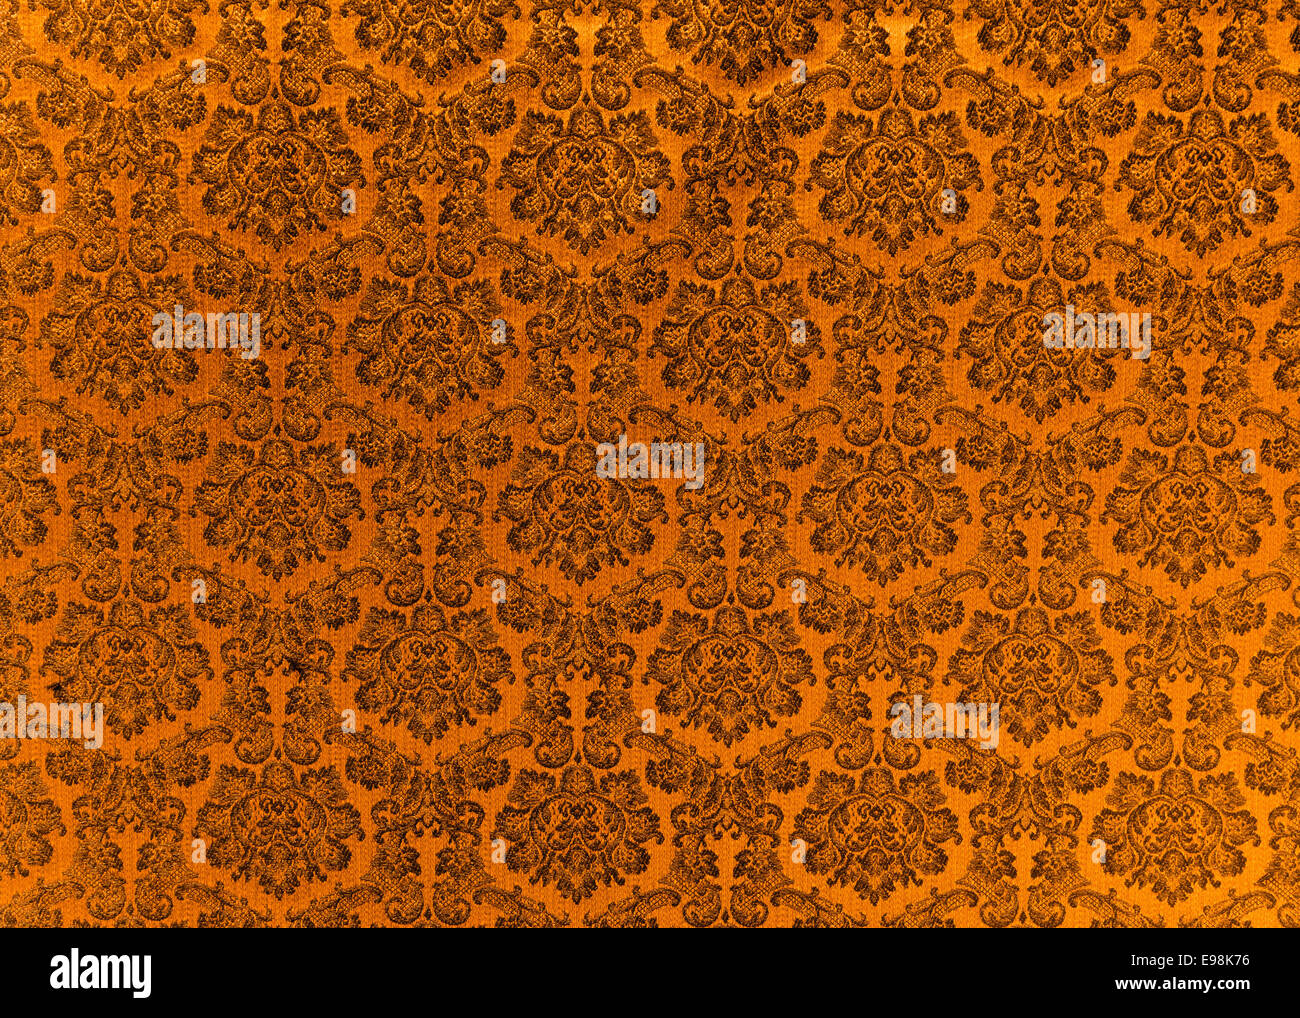 Abstract background of a heavy copper brocade fabric with interwoven repeat design. Stock Photo